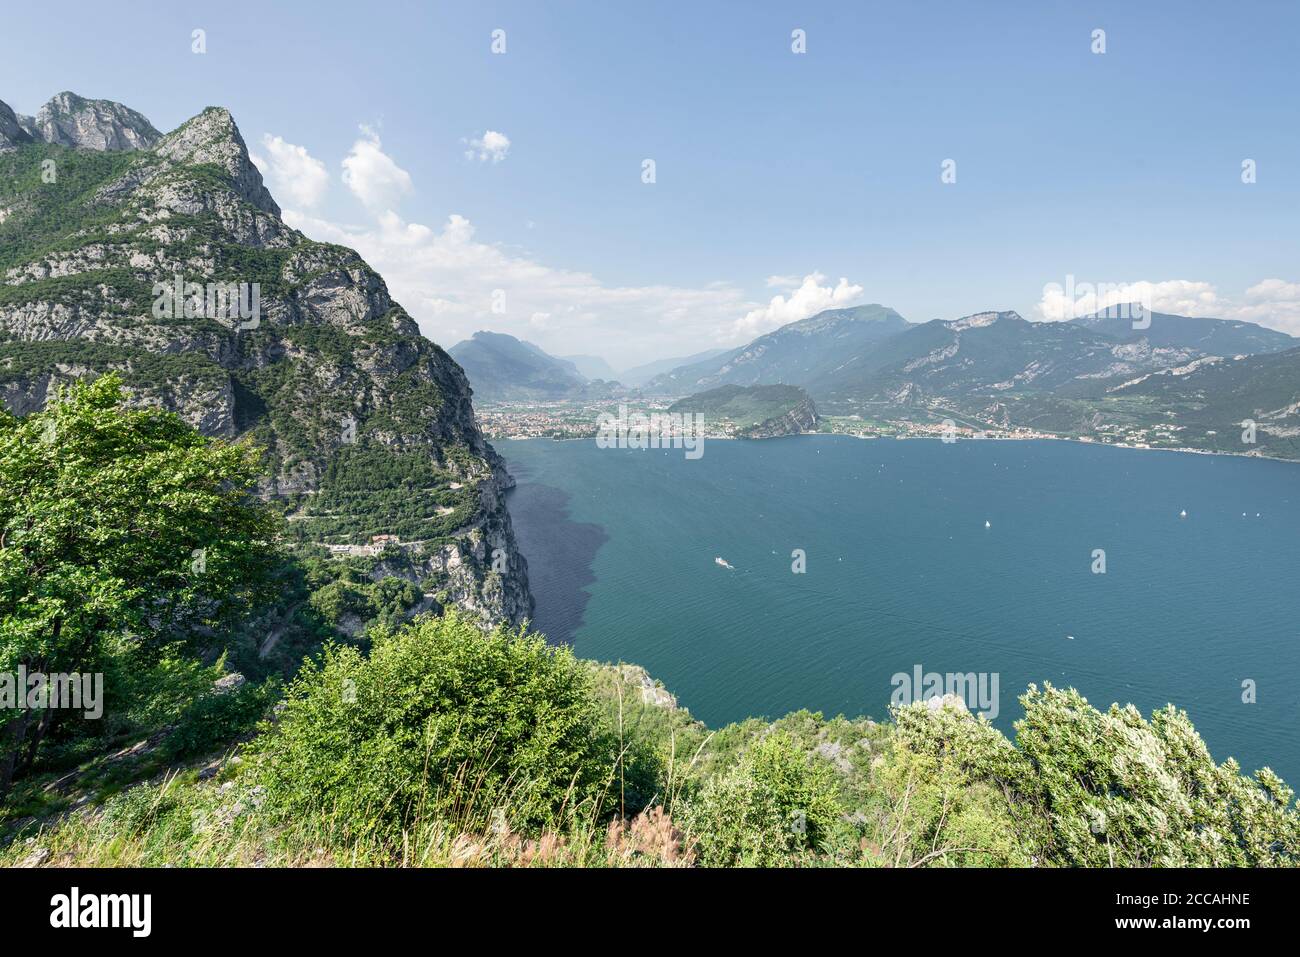 View of the serpentines of the old Ponale road and the rocky steep bluffs of Lake Garda with the panorama of Riva del Garda and the Alps , Italy Stock Photo